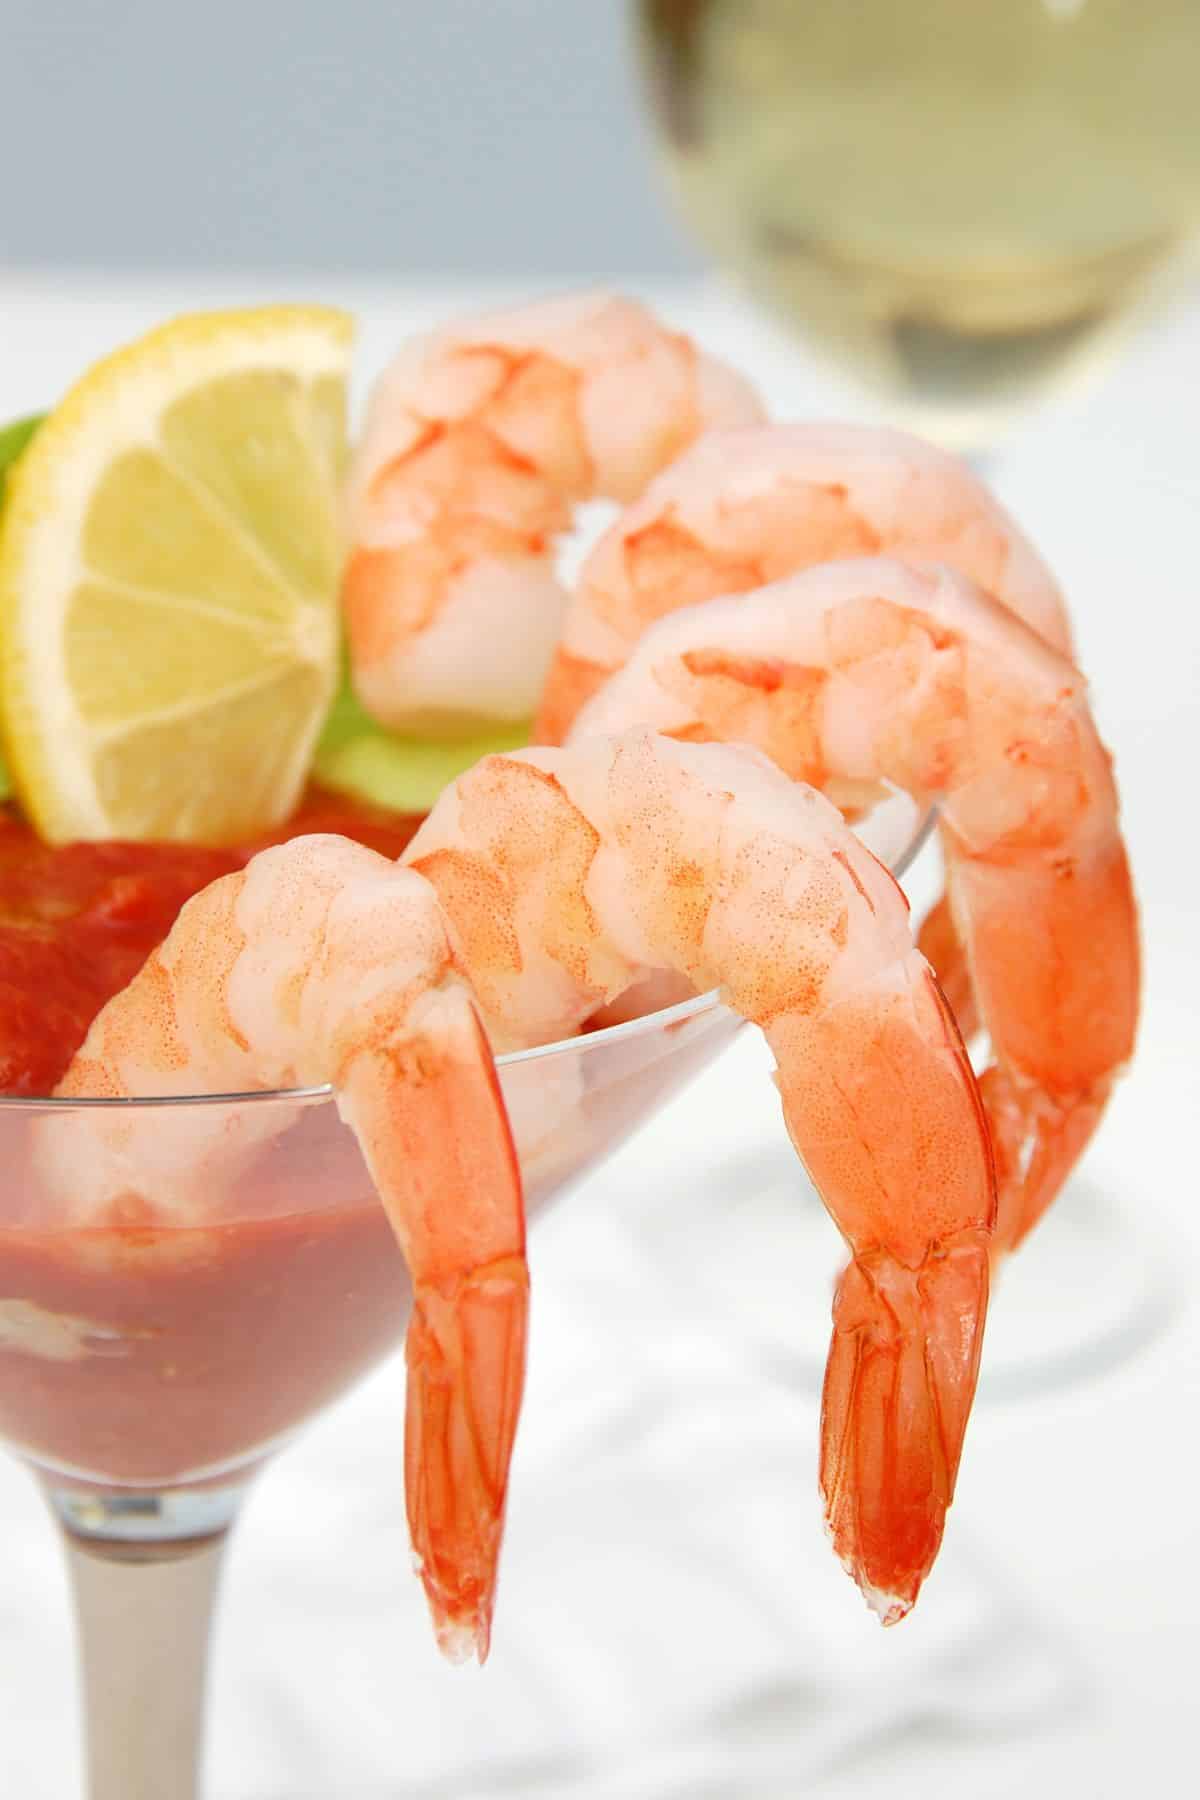 Shrimp cocktail in a martini glass.